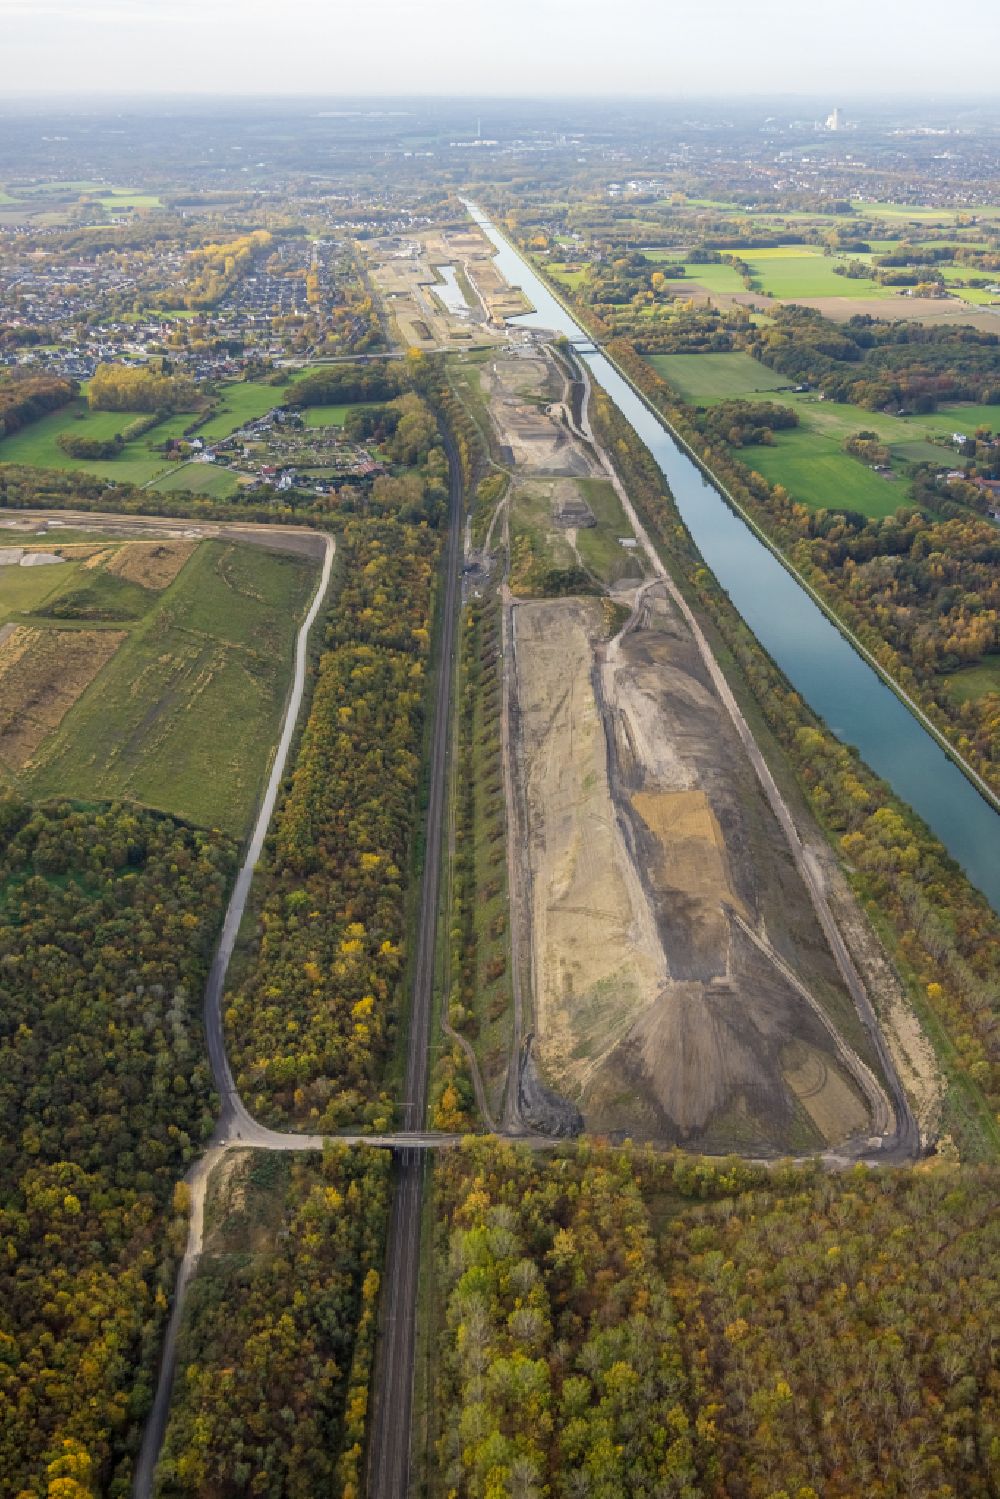 Aerial image Bergkamen - Construction site with development works and embankments works along the waterway of the Datteln-Hamm Canal northeast of the planned water town in Bergkamen at Ruhrgebiet in the state North Rhine-Westphalia, Germany